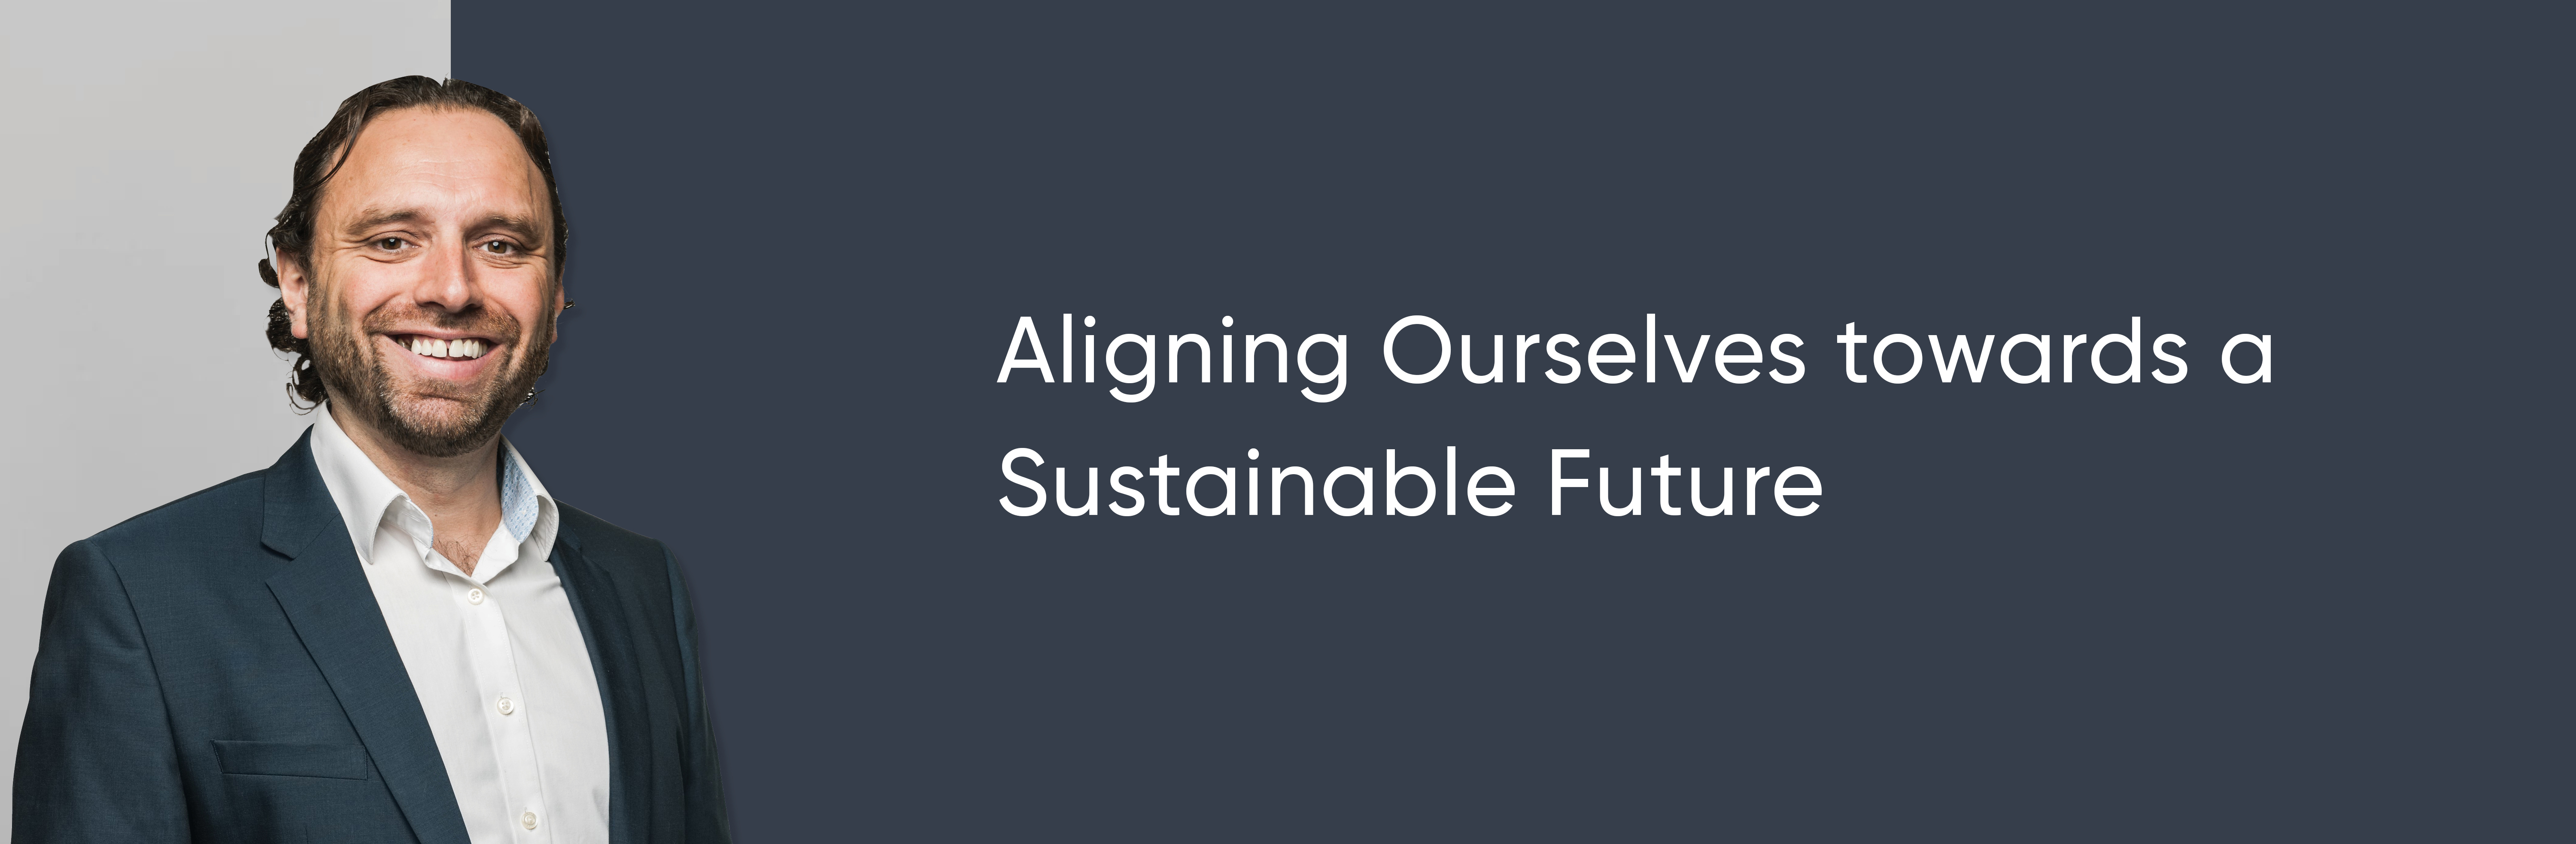 Aligning Ourselves towards a Sustainable Future